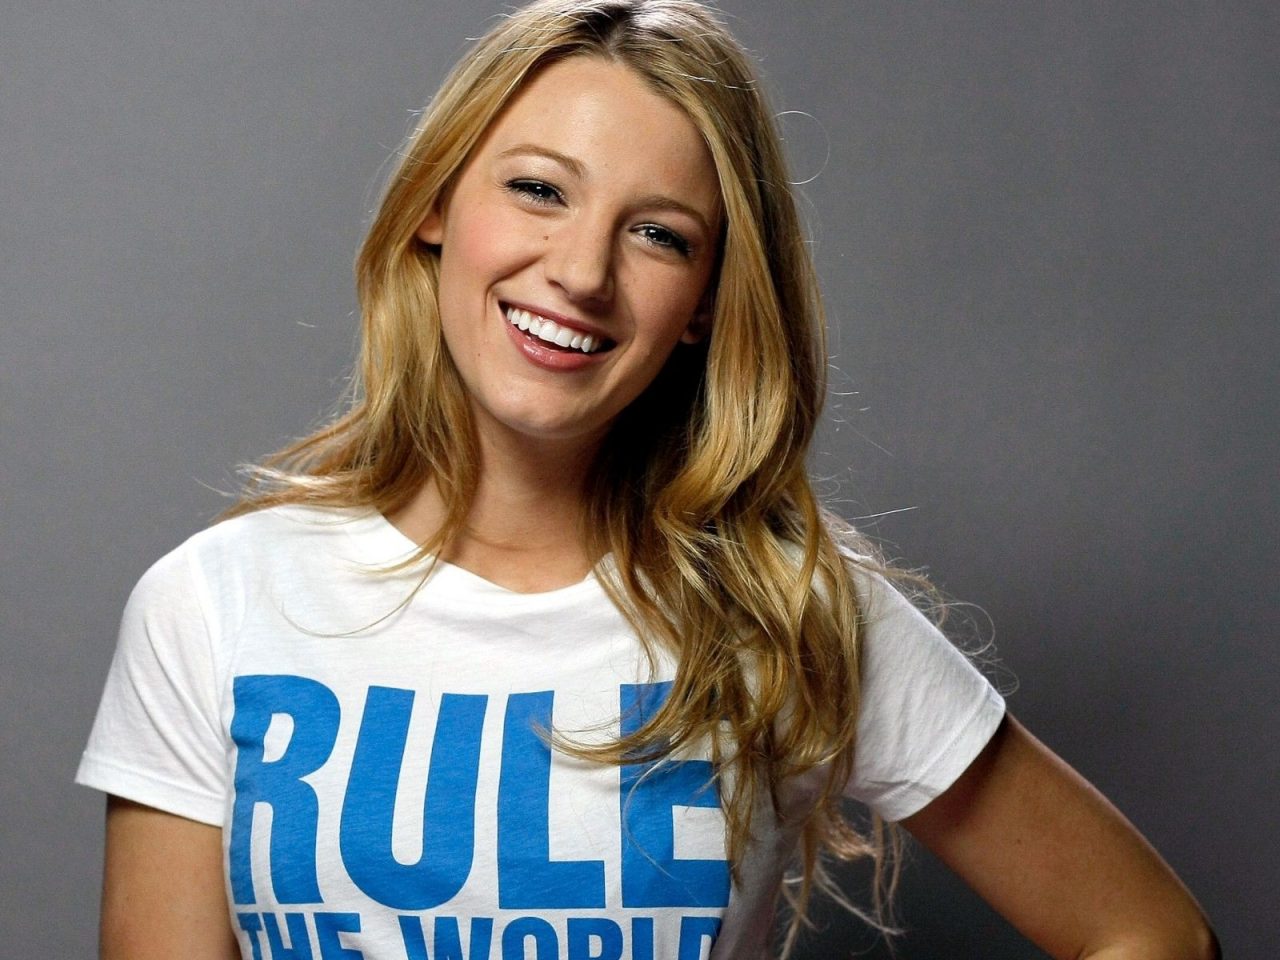 Very Cute Smile Of Actress Blake Lively Photos